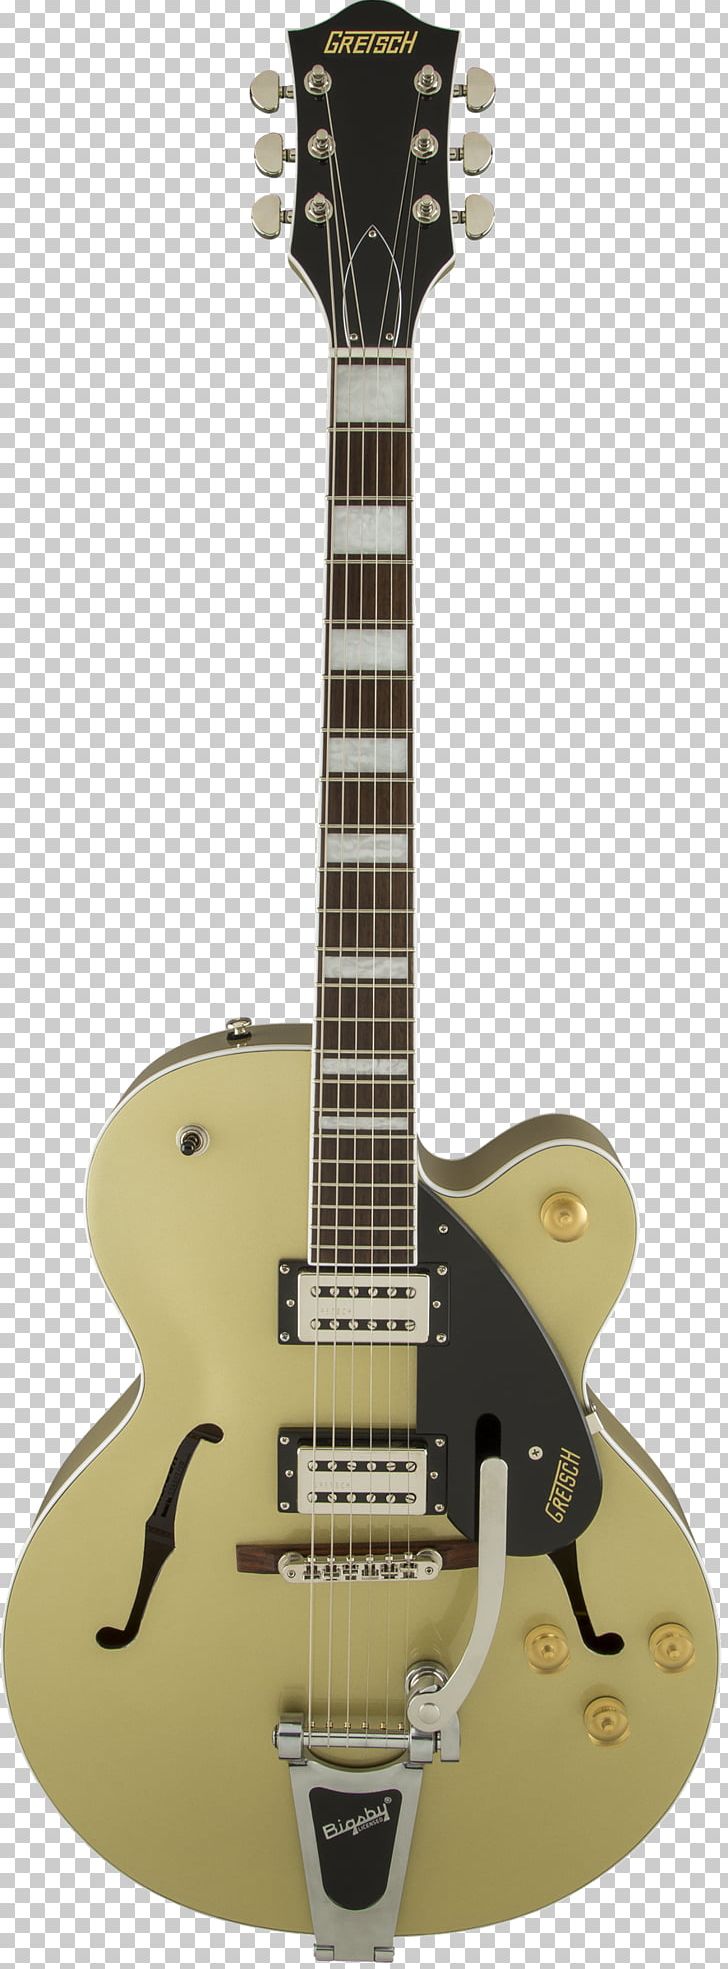 Epiphone Electric Guitar Gibson J-200 Cutaway PNG, Clipart, Acoustic Electric Guitar, Archtop Guitar, Cutaway, Epiphone, Gretsch Free PNG Download